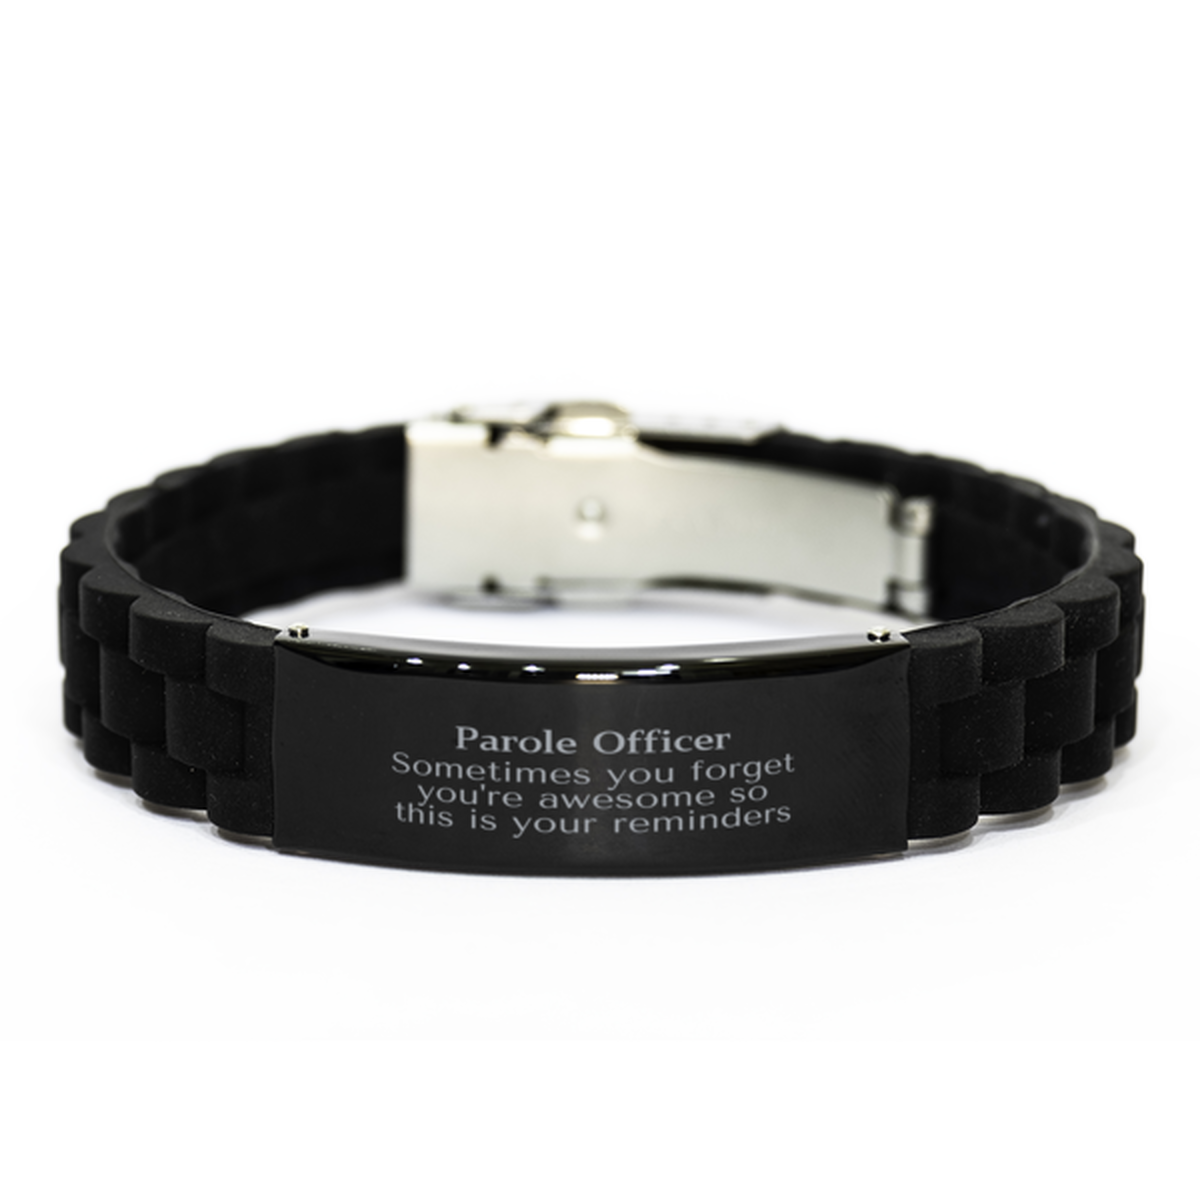 Sentimental Parole Officer Black Glidelock Clasp Bracelet, Parole Officer Sometimes you forget you're awesome so this is your reminders, Graduation Christmas Birthday Gifts for Parole Officer, Men, Women, Coworkers